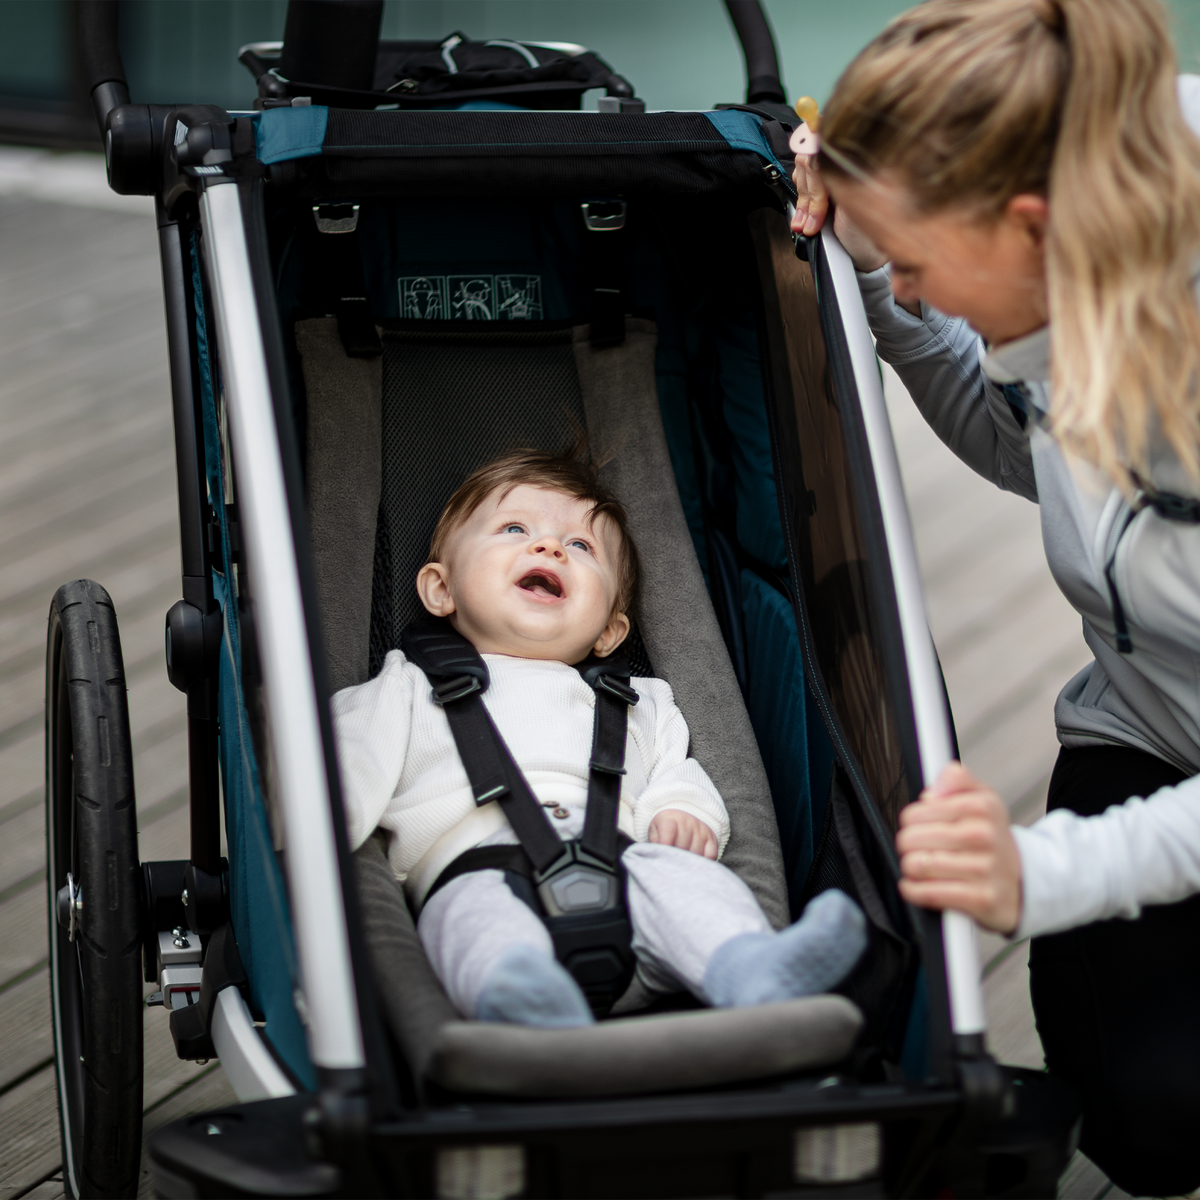 A baby sitting in a kids bike trailer with an Infant Sling looks up at her mother.